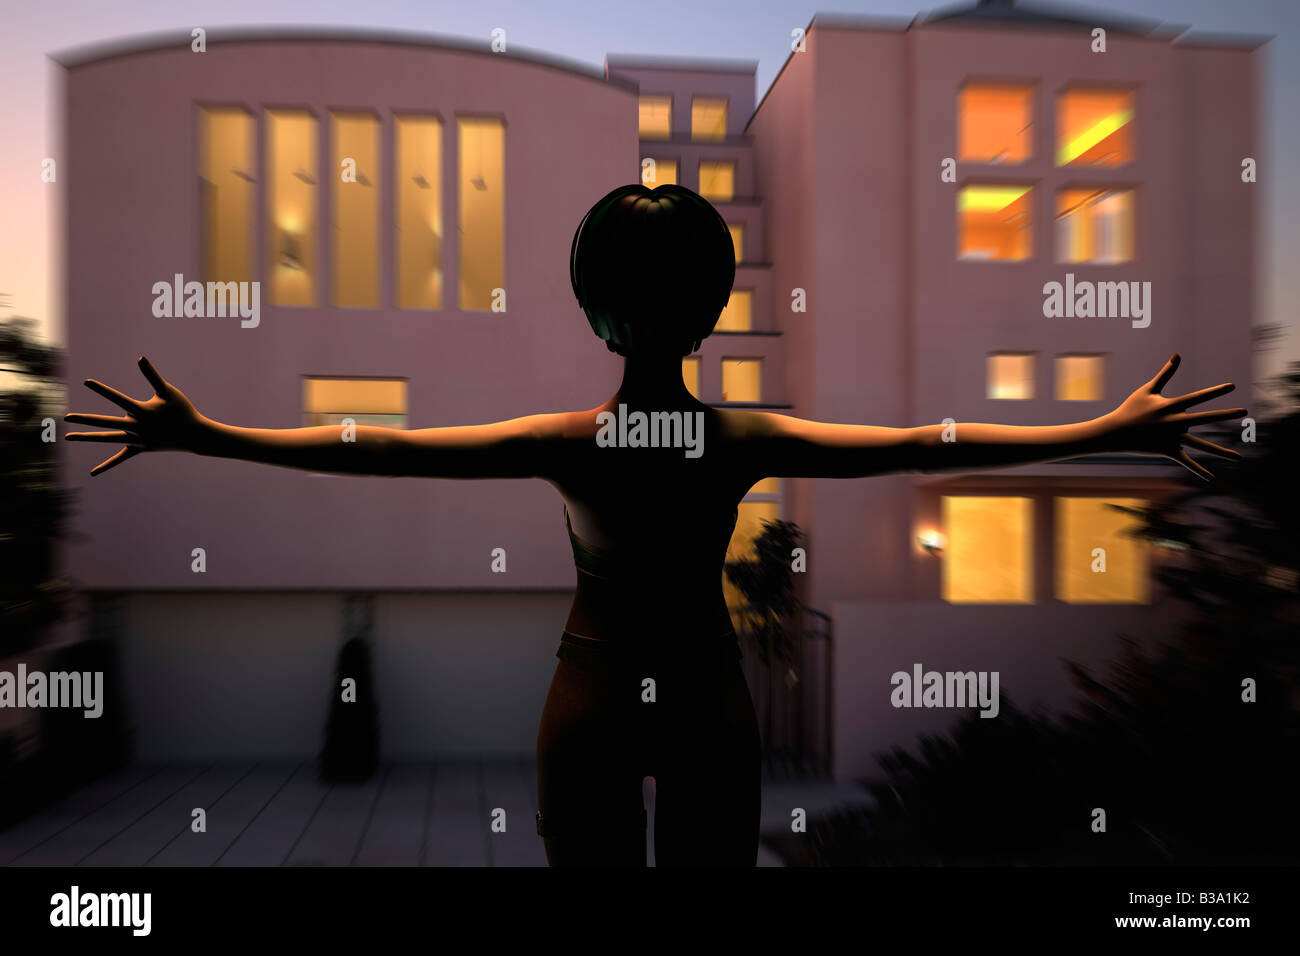 Computer Illustration Of A Young Woman With OutStrectched Arms Returning Home To Her House Stock Photo